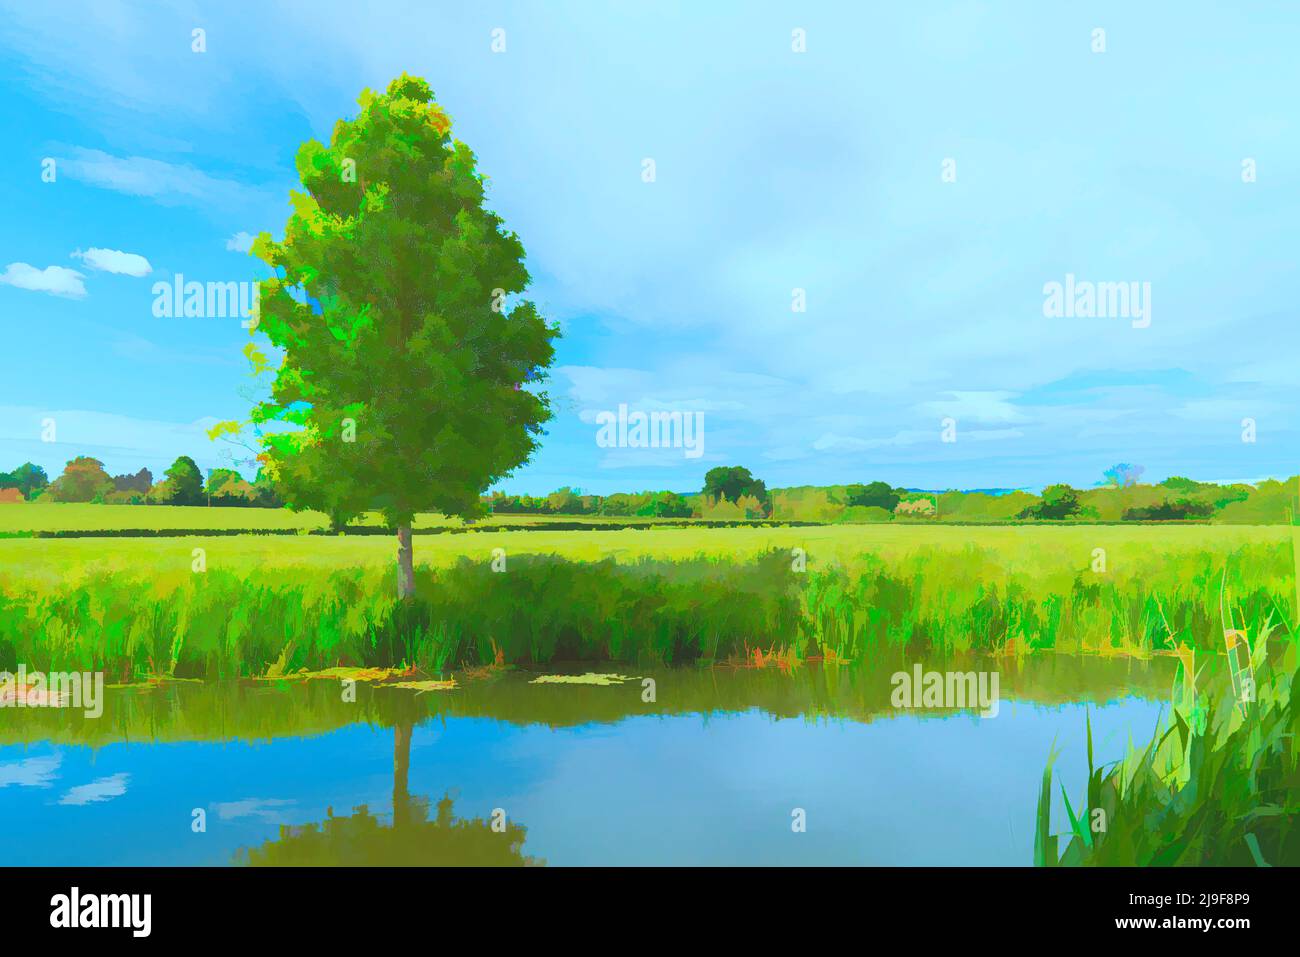 Tree by river with reeds blue sky and reflection illustration Stock Photo